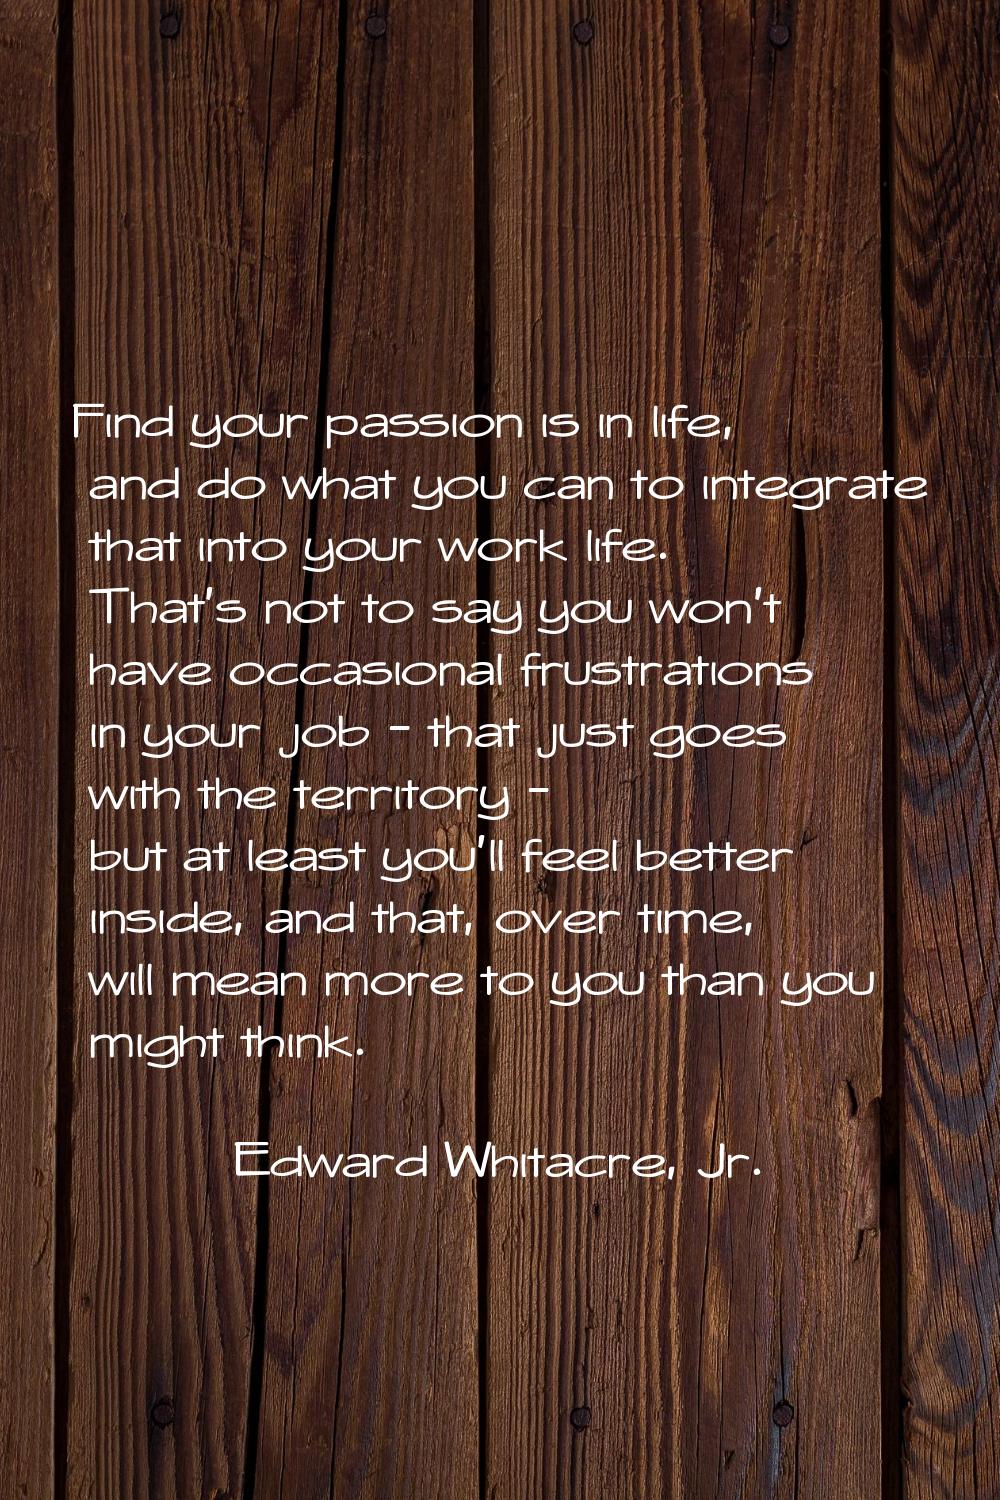 Find your passion is in life, and do what you can to integrate that into your work life. That's not